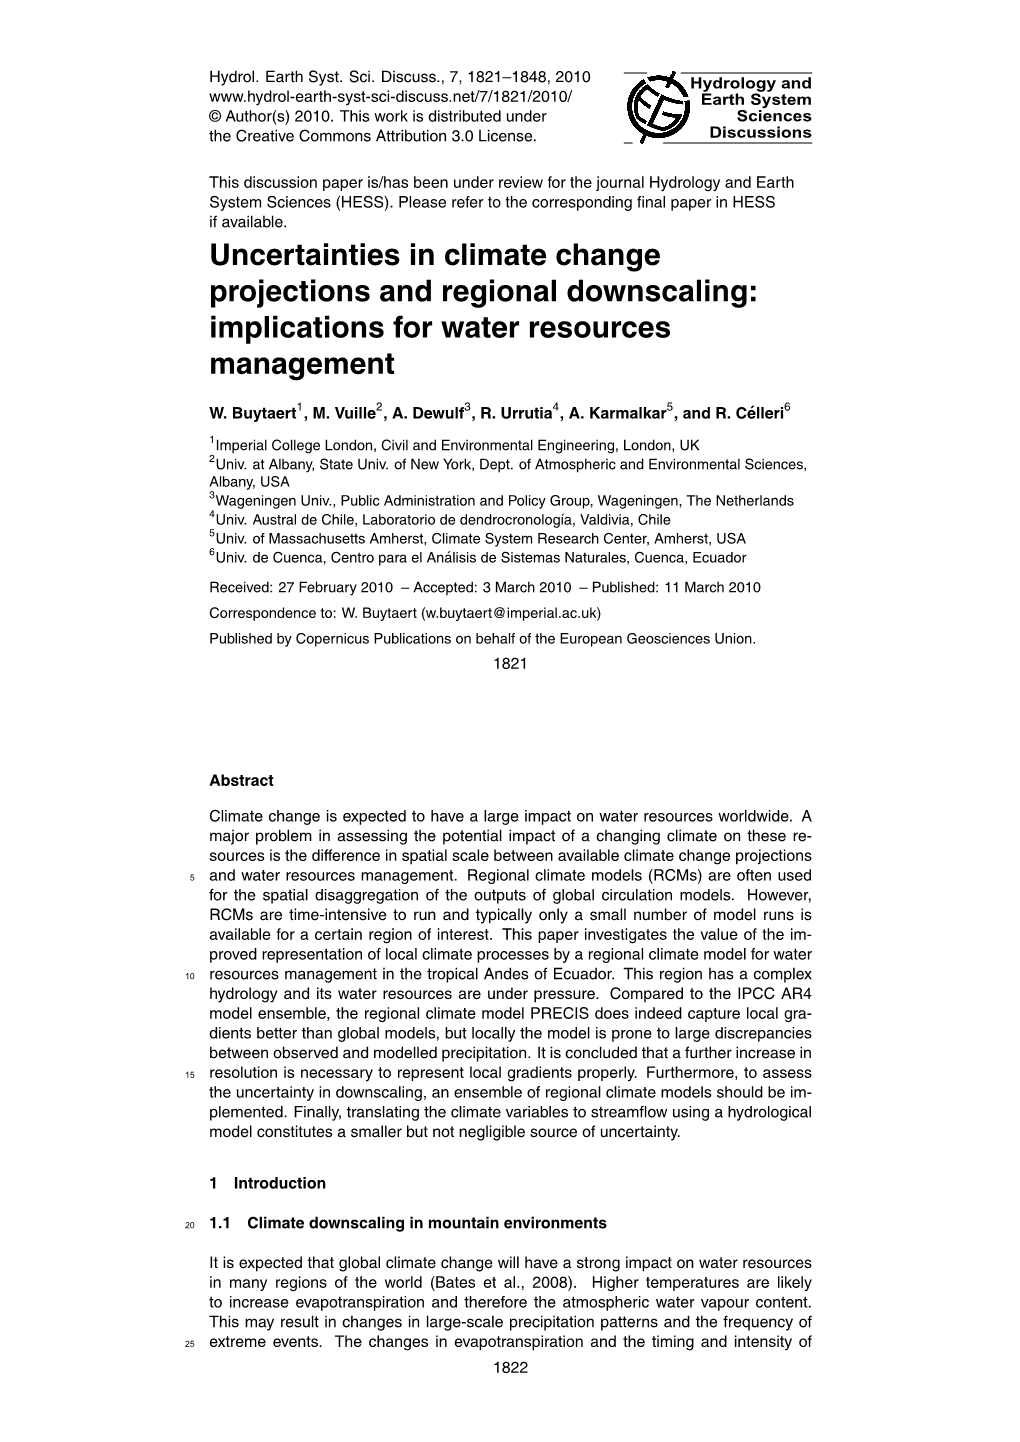 Uncertainties in Climate Change Projections and Regional Downscaling: Implications for Water Resources Management